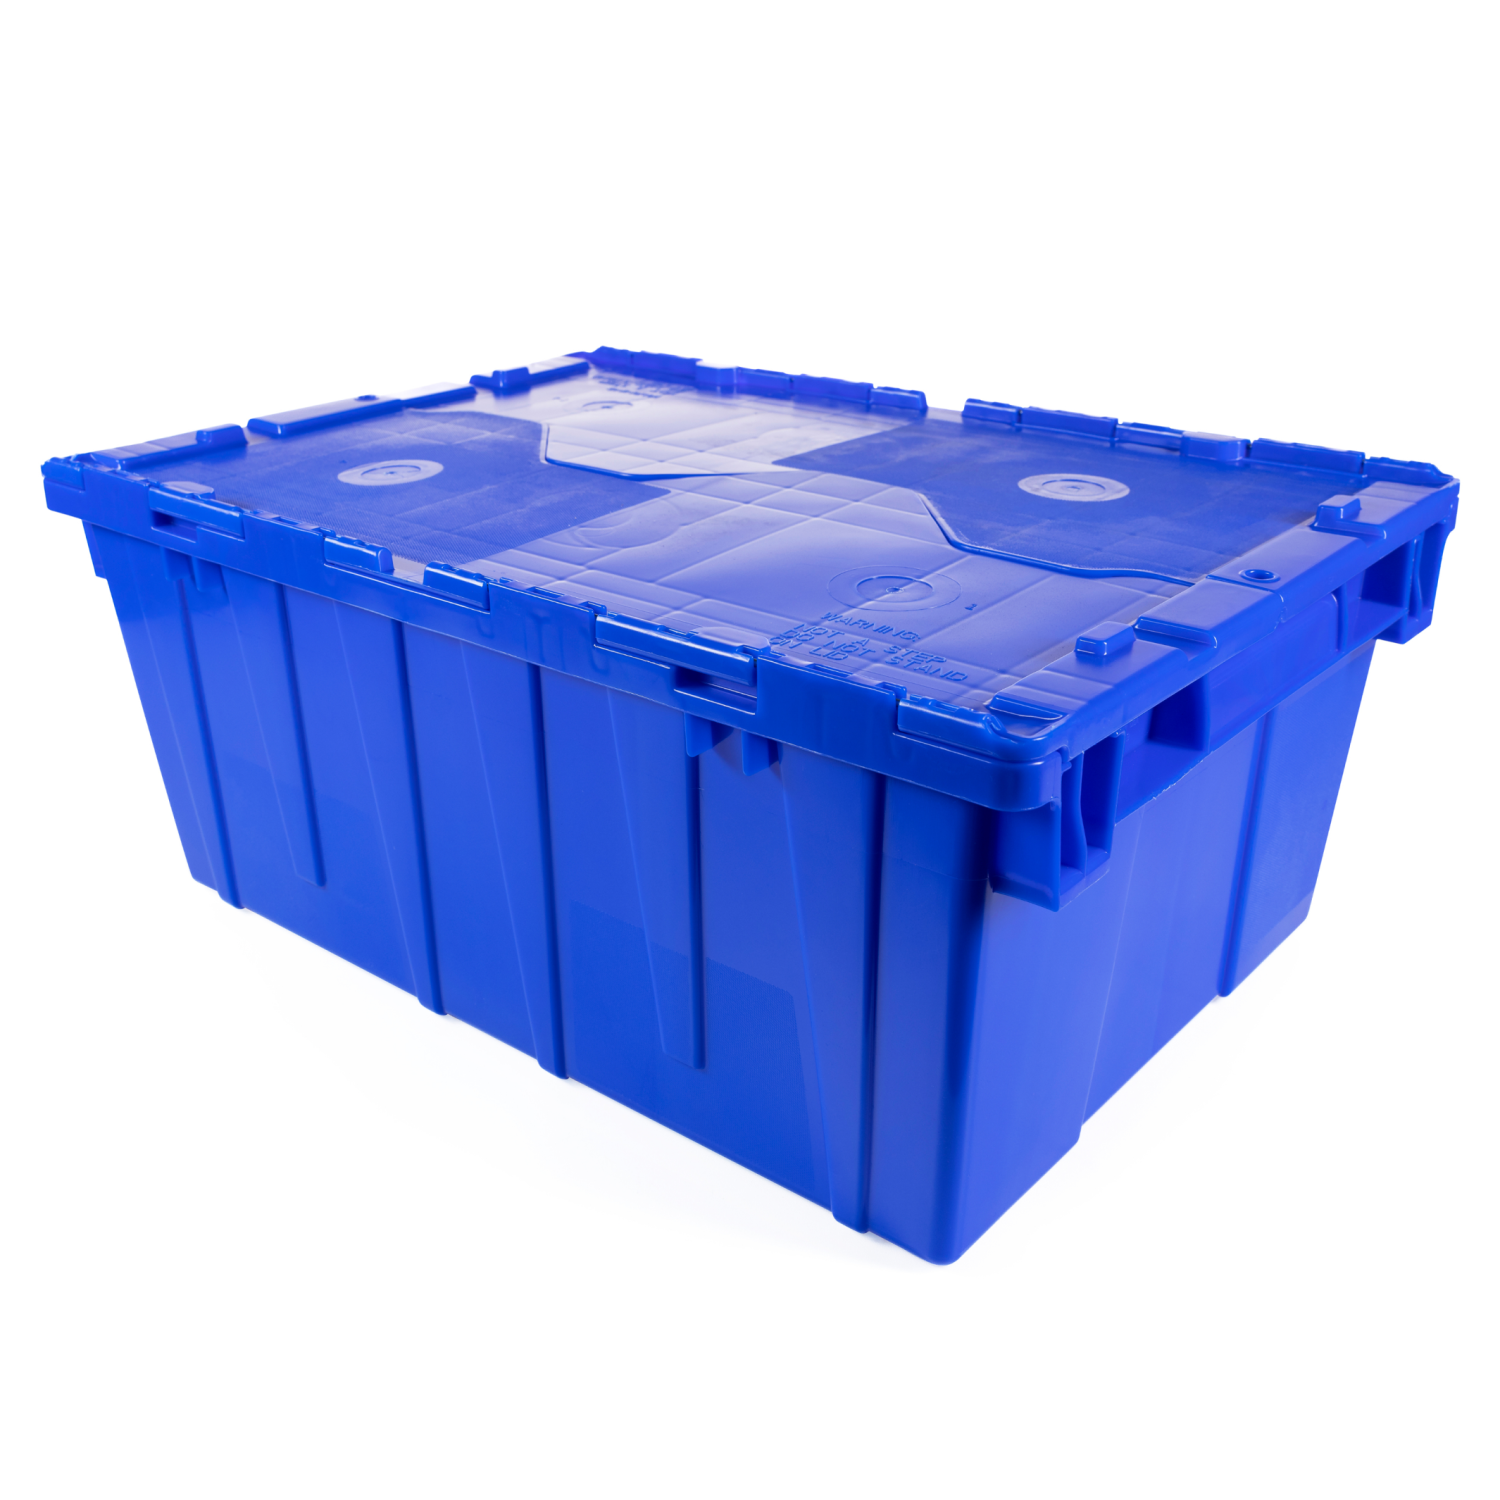 10-Gallon Industrial Plastic Tote with Hinged Lids, Blue - Heavy